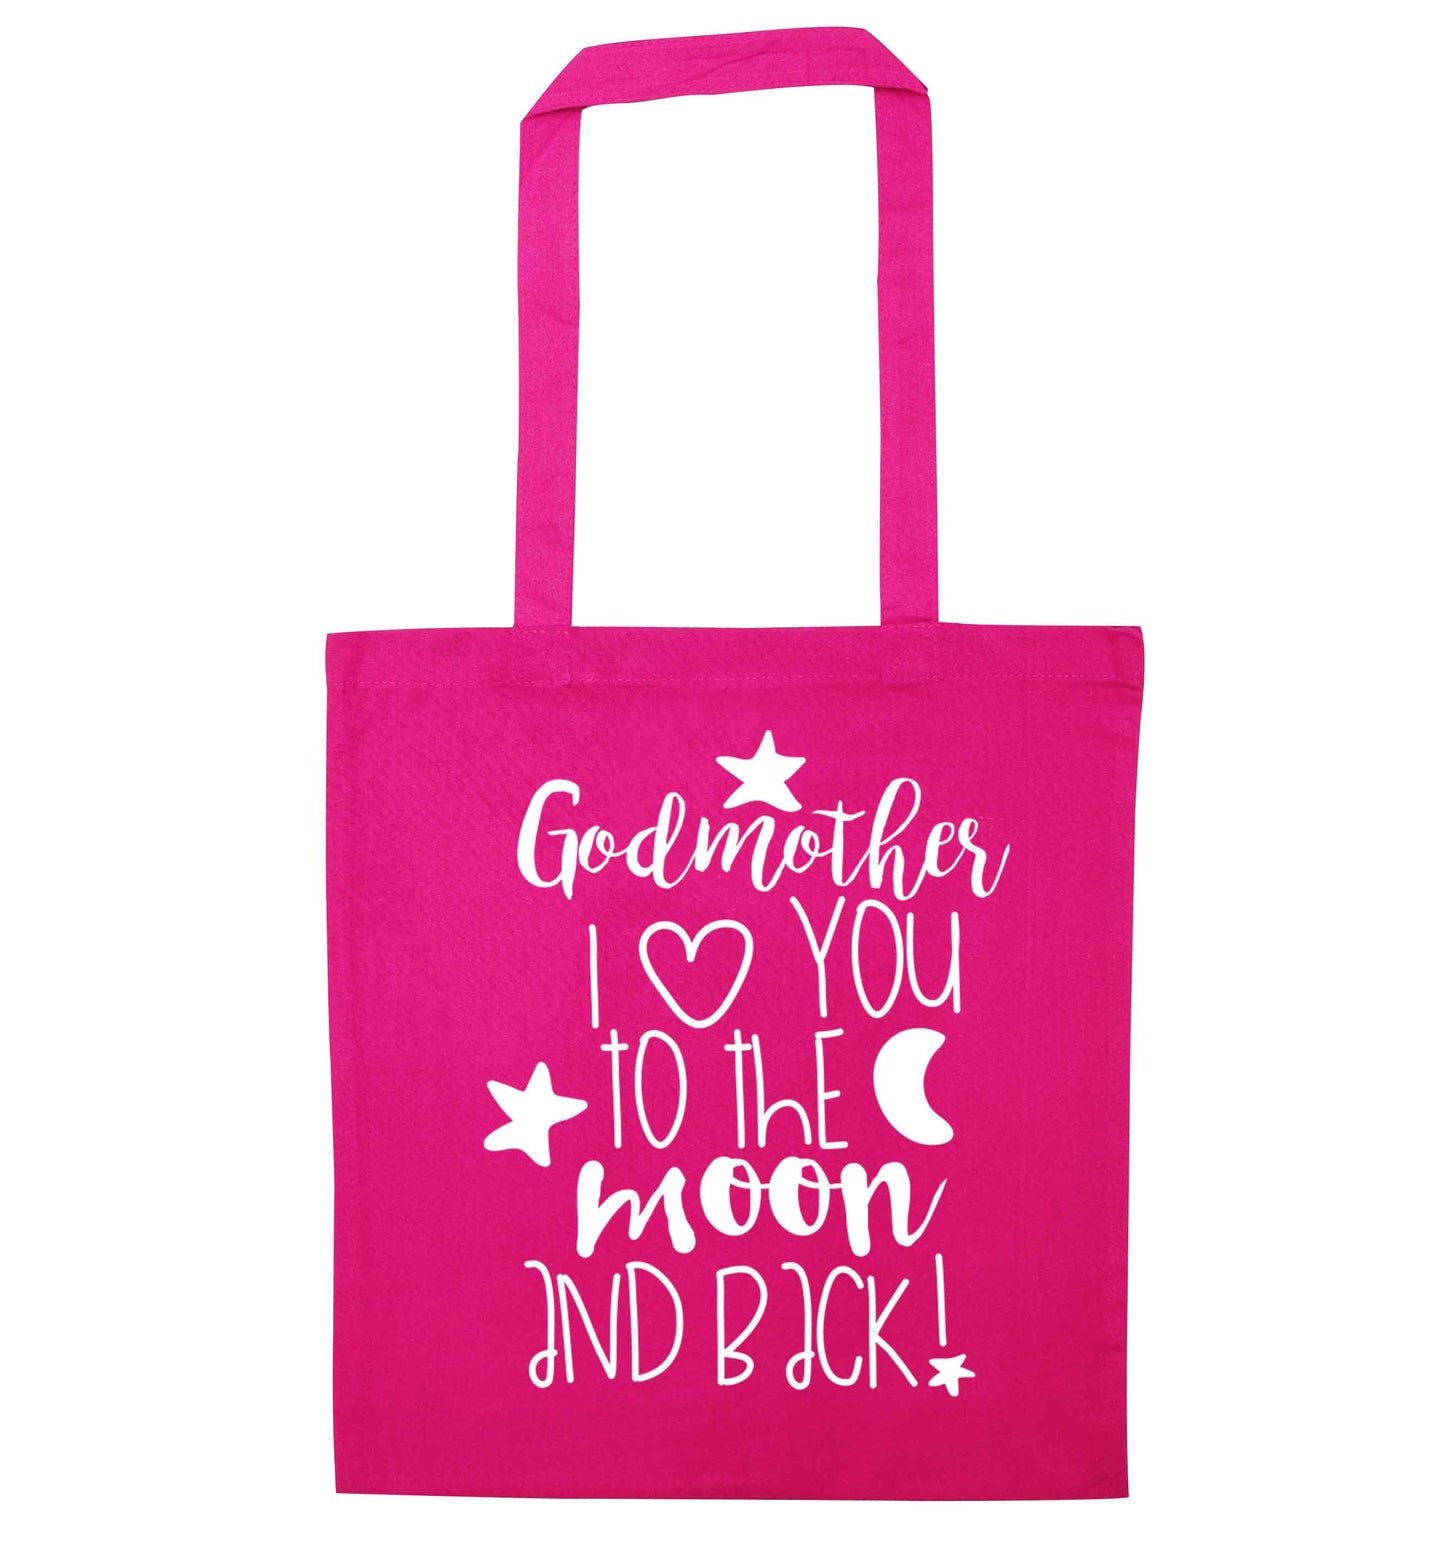 Godmother I love you to the moon and back pink tote bag